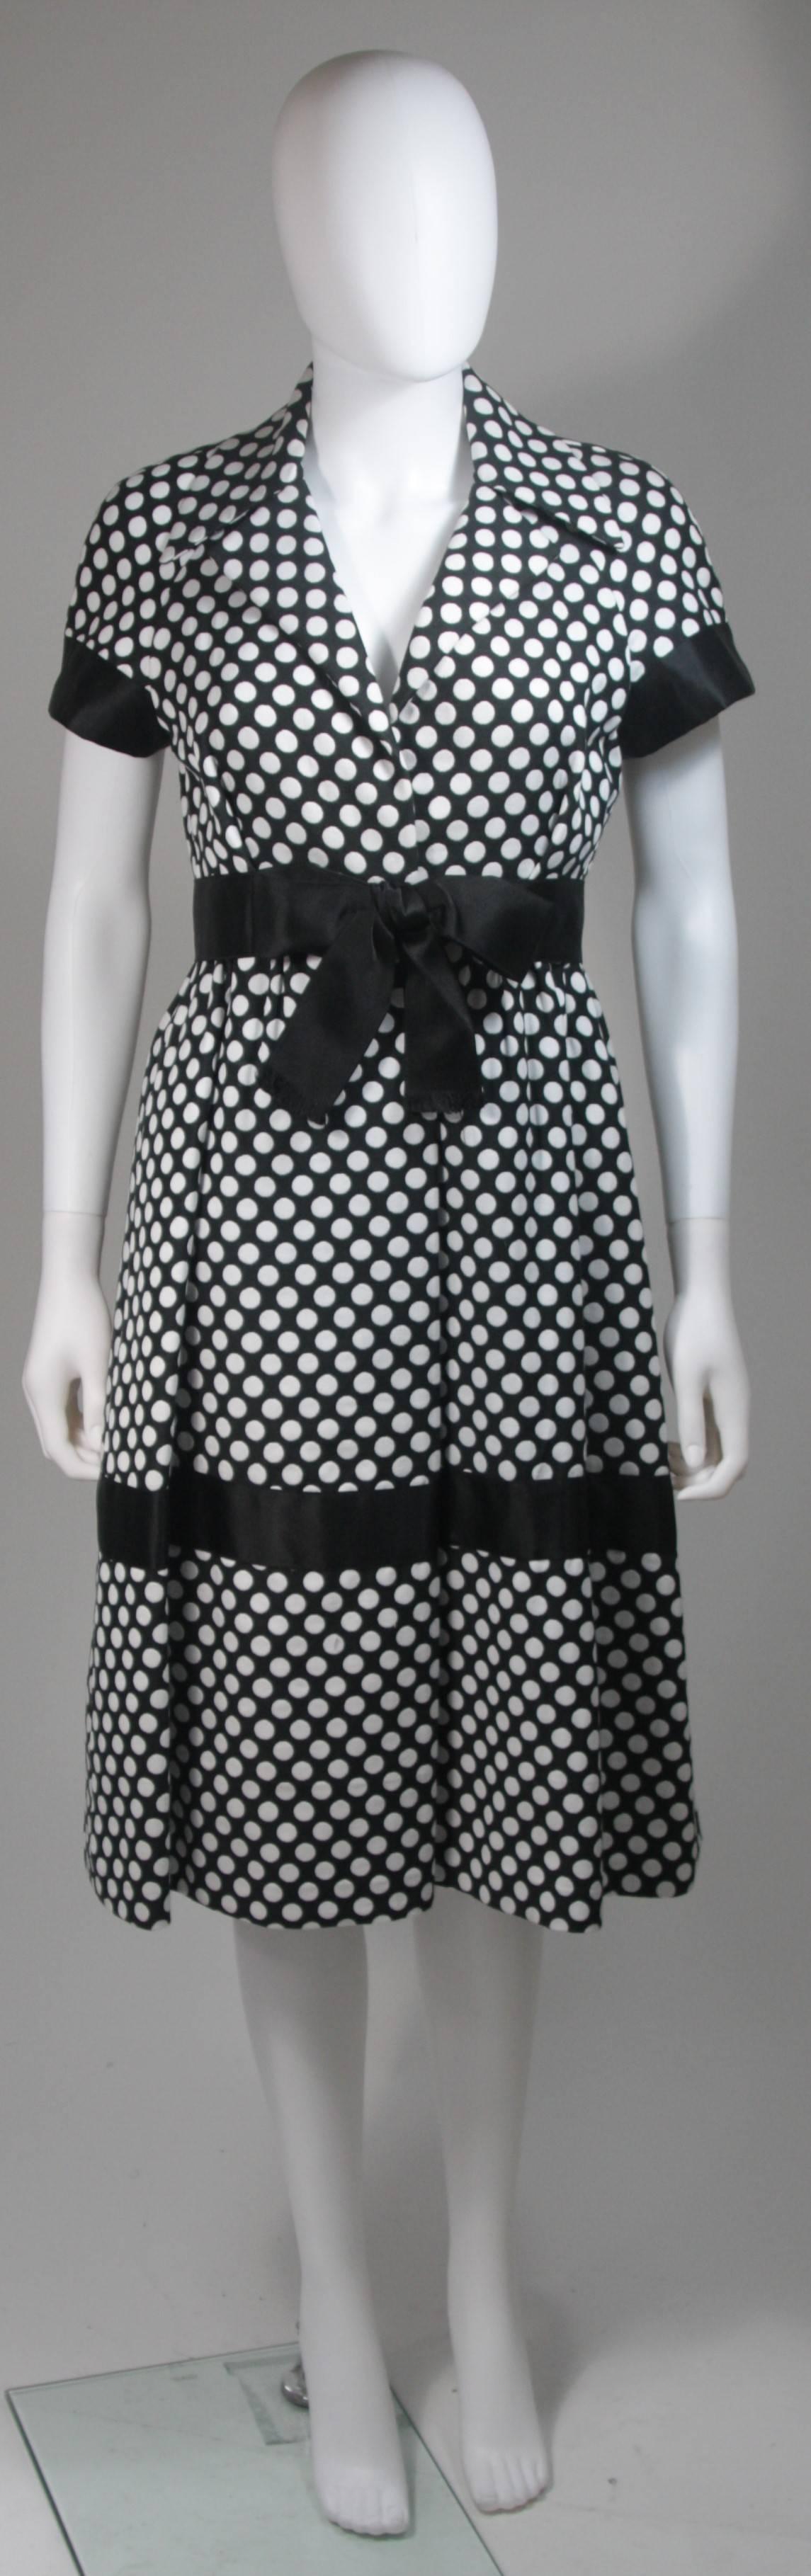 This Geoffrey Beene dress is composed of a black and white polka dot fabric. Features satin trimming and bow. There are center front hook and closures as well as snaps. The design has a large collar and pleat flared skirt with side pockets. In